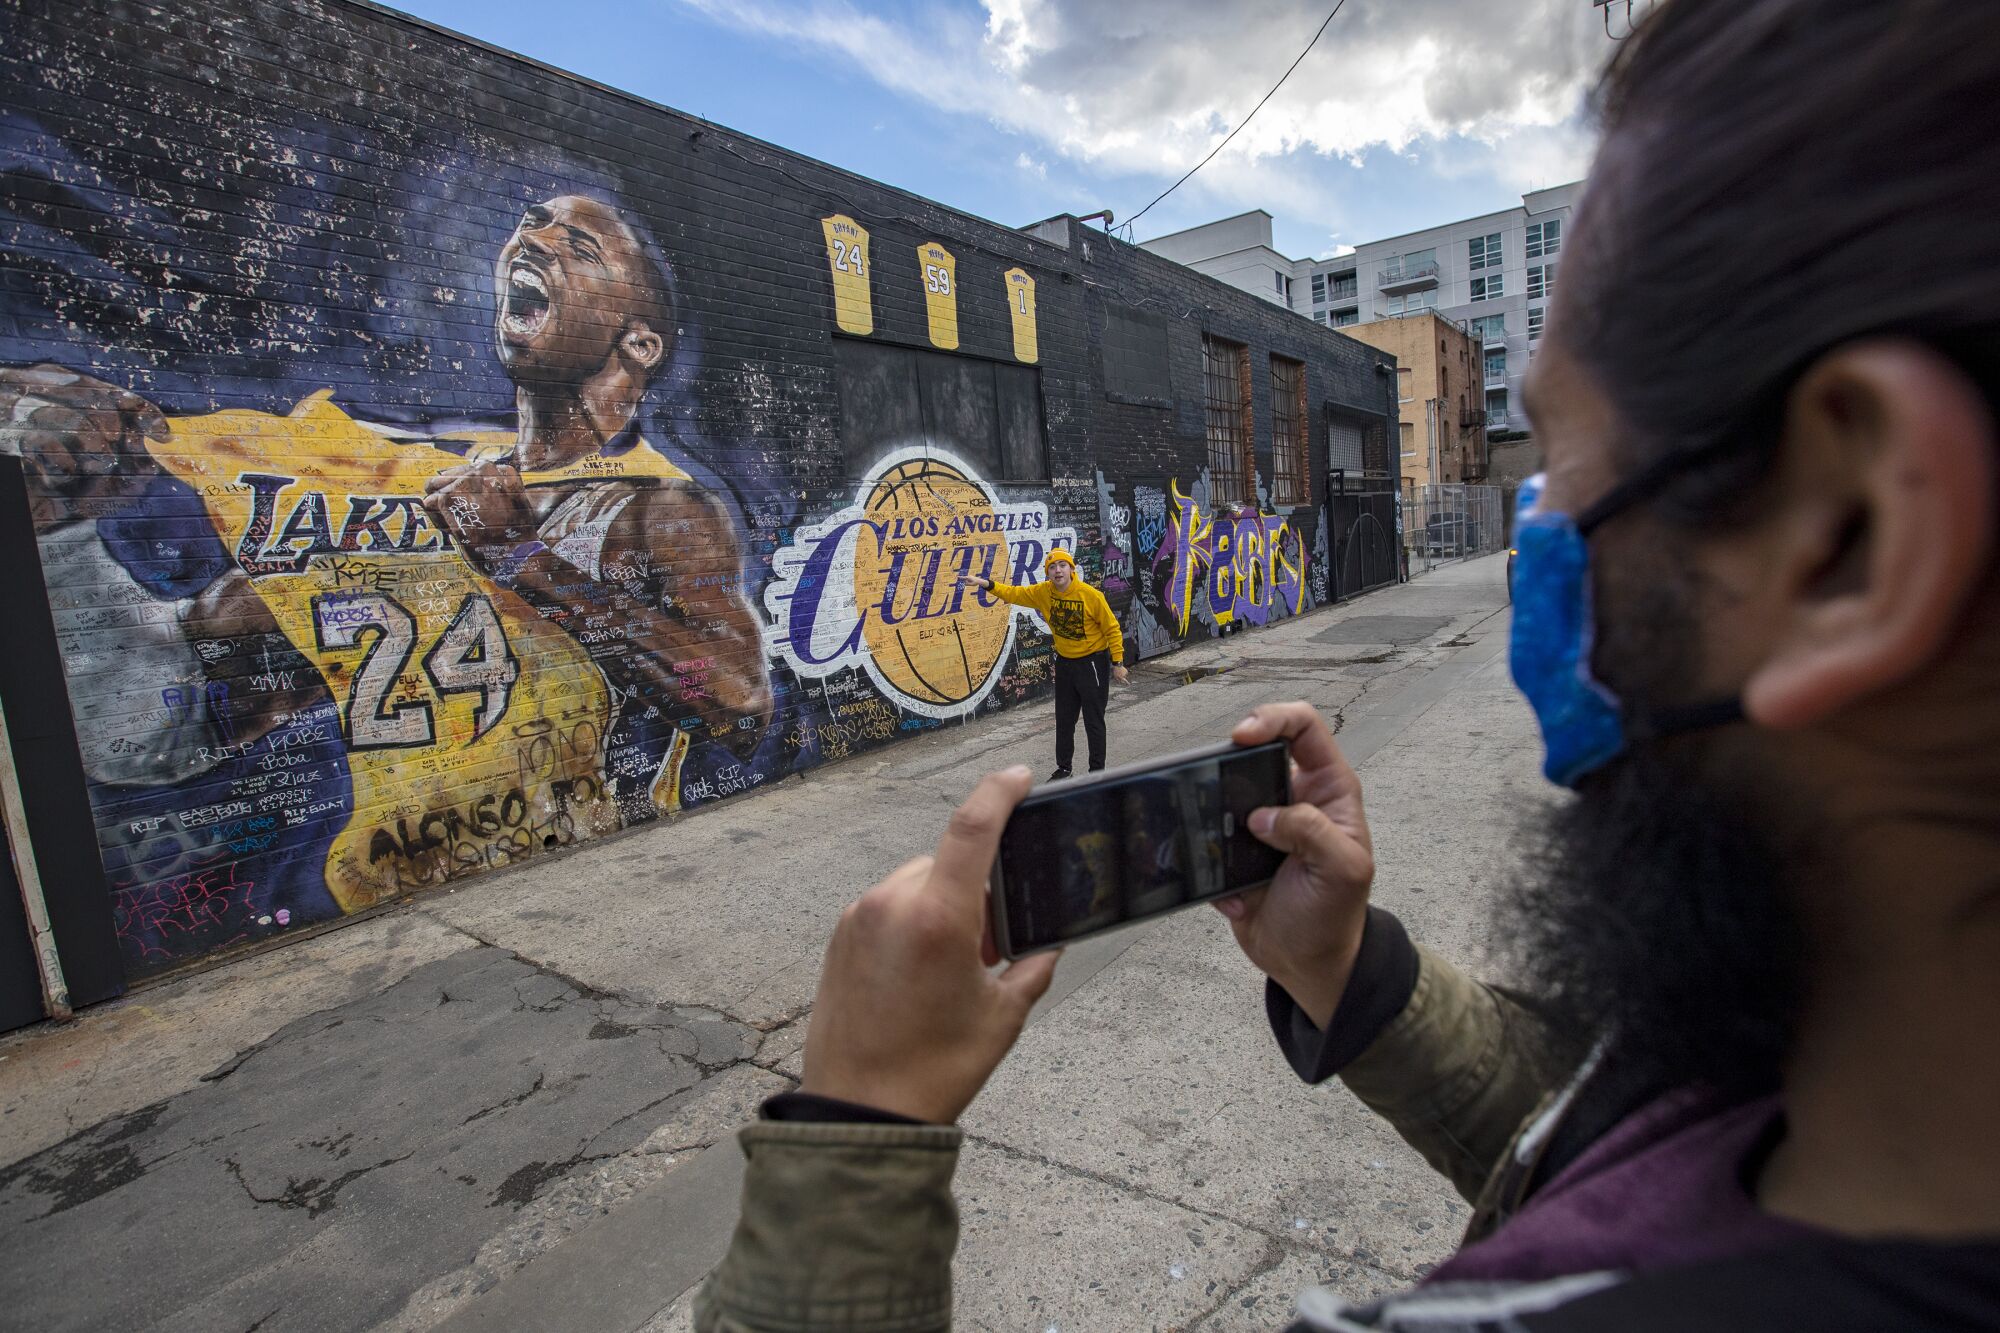 A man holds up his cellphone to take a picture of another man in front of a mural of Kobe Bryant in a Lakers uniform.